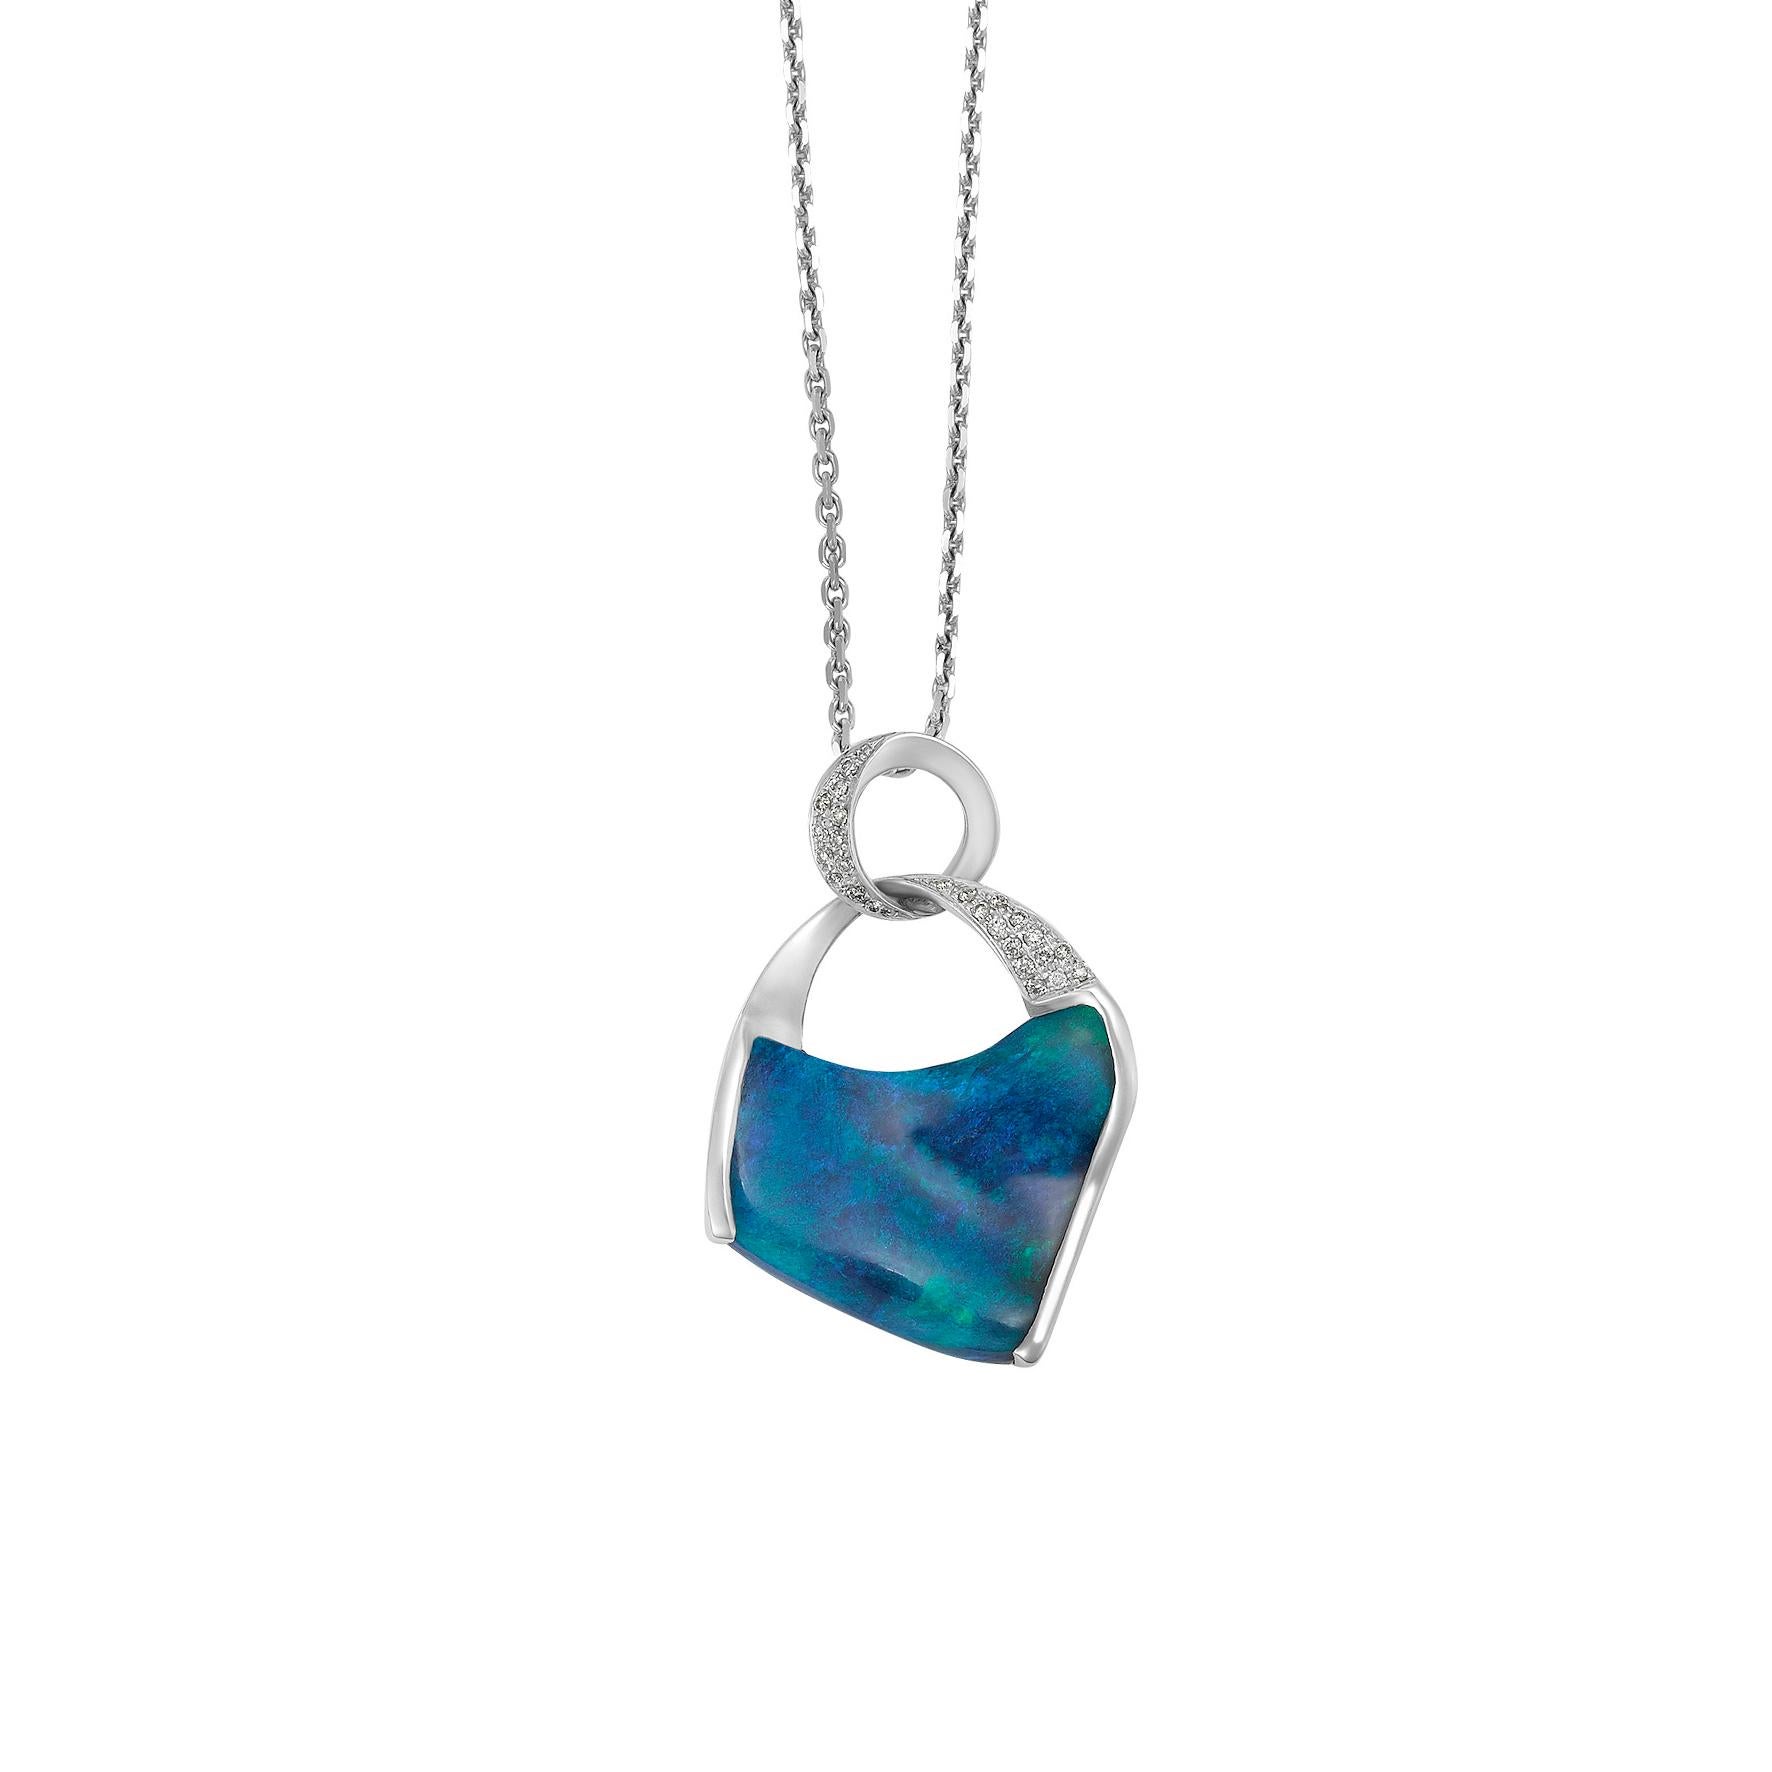 Giulians Contemporary 18 karat white gold Australian Black opal pendant necklace.  This contemporary pendant features a free-form 8.44ct natural solid opal from Lightning Ridge NSW, with bright blue and green play-of-colour.  The opal is semi bezel